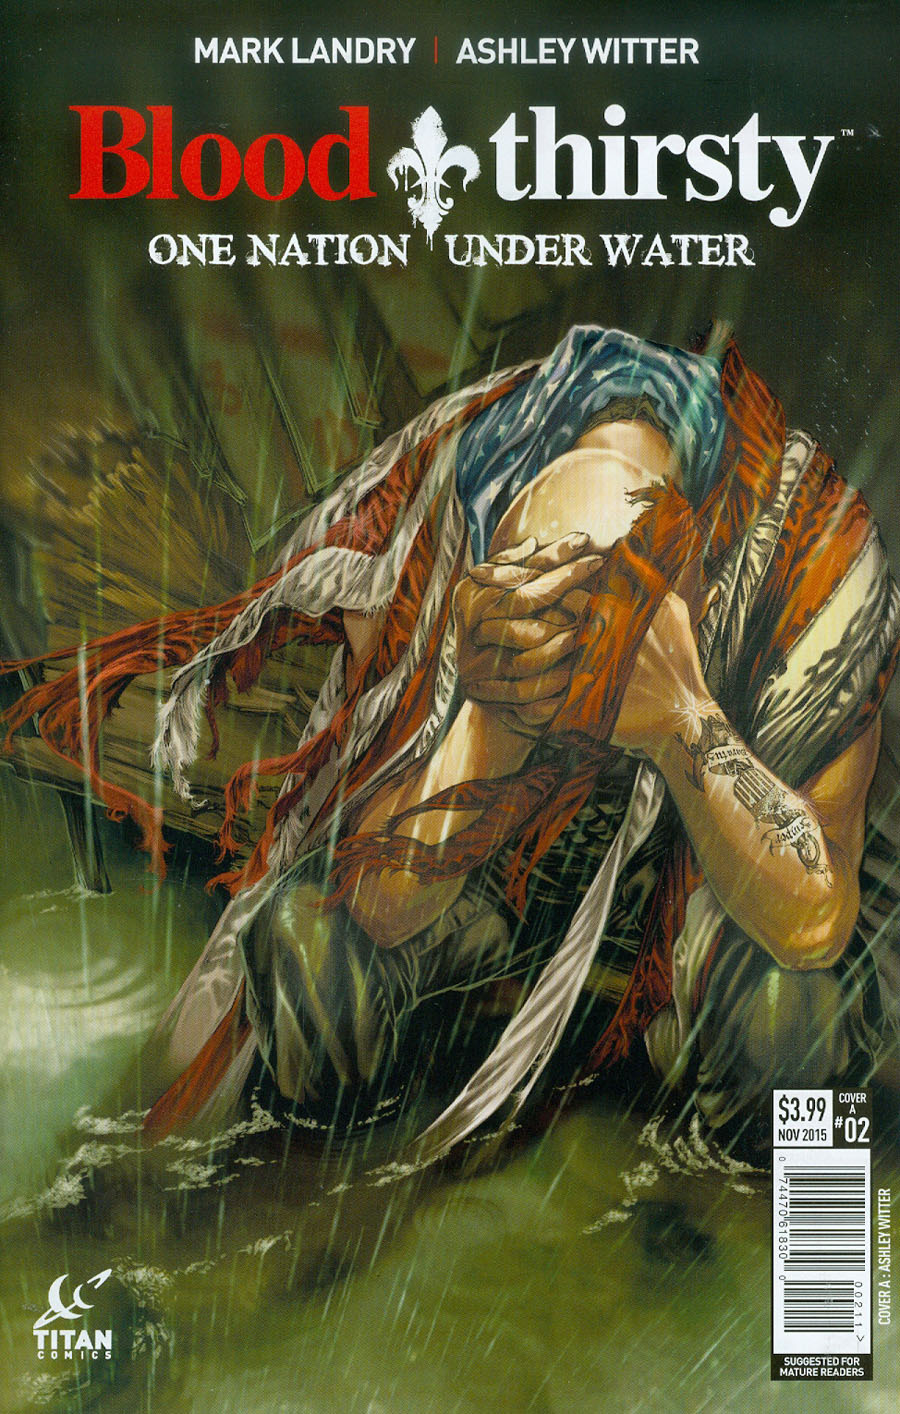 Bloodthirsty One Nation Under Water #2 Cover A Regular Ashley Witter Cover